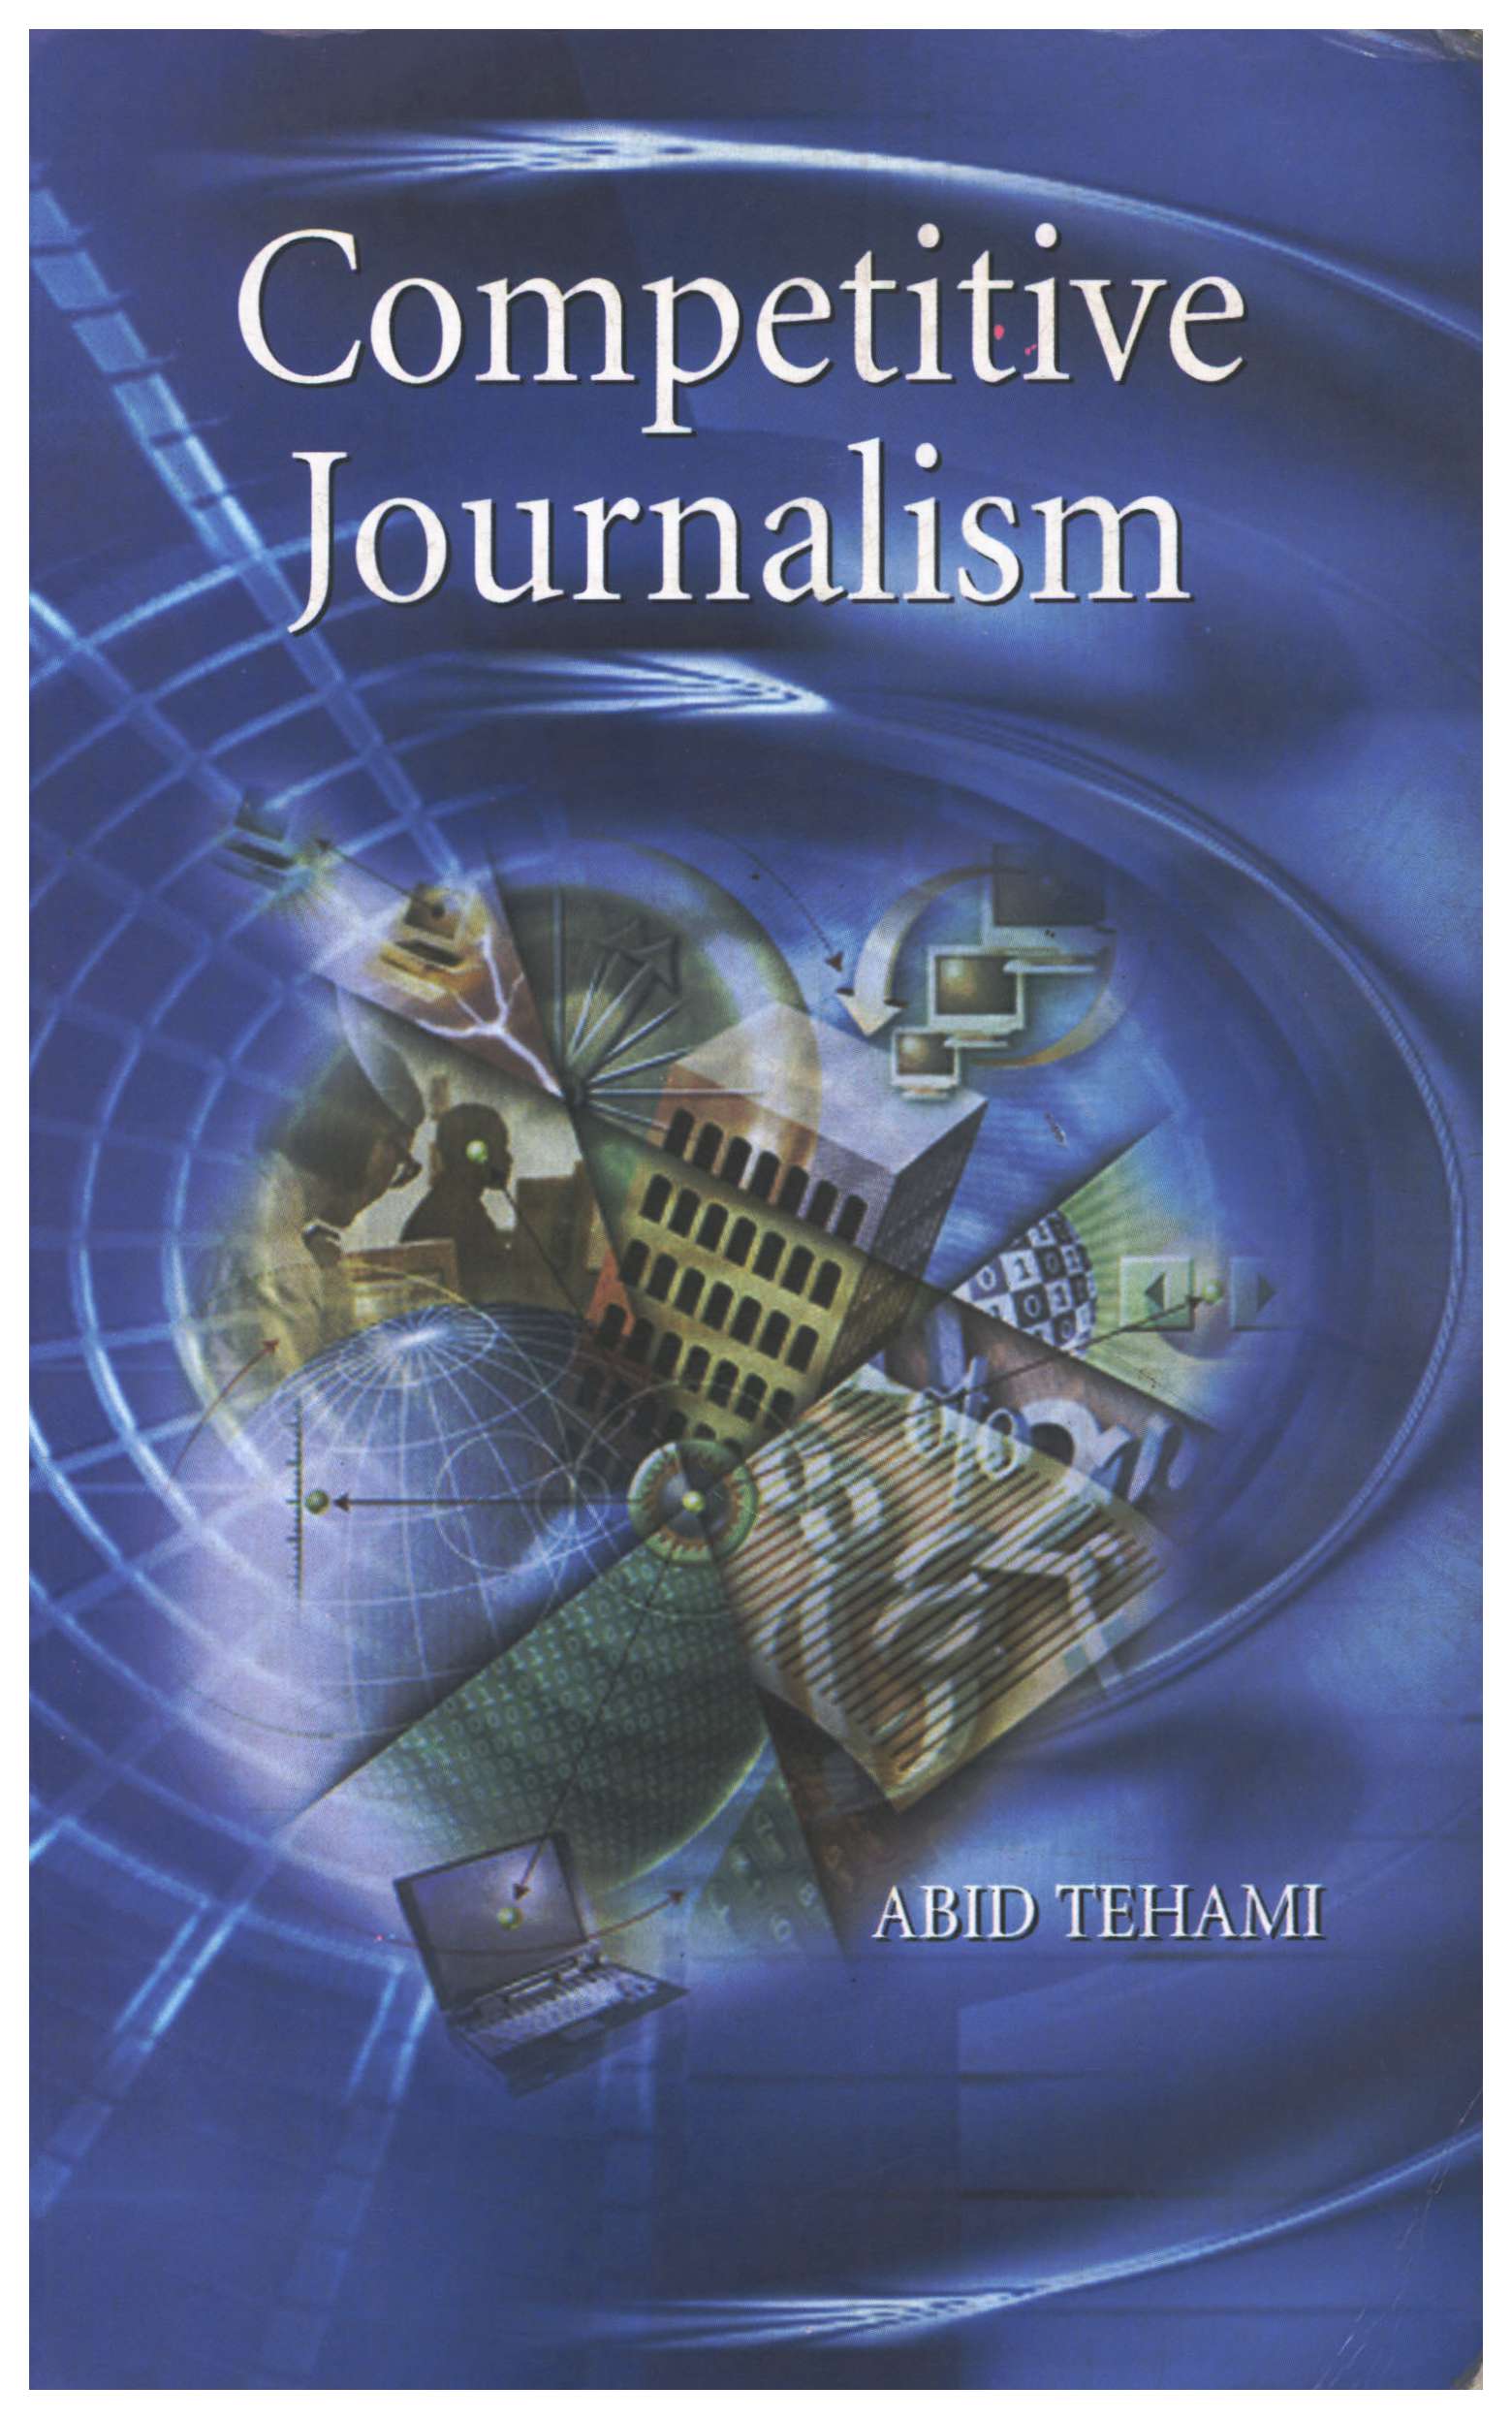 Competitive Journalism by Abid Tehami